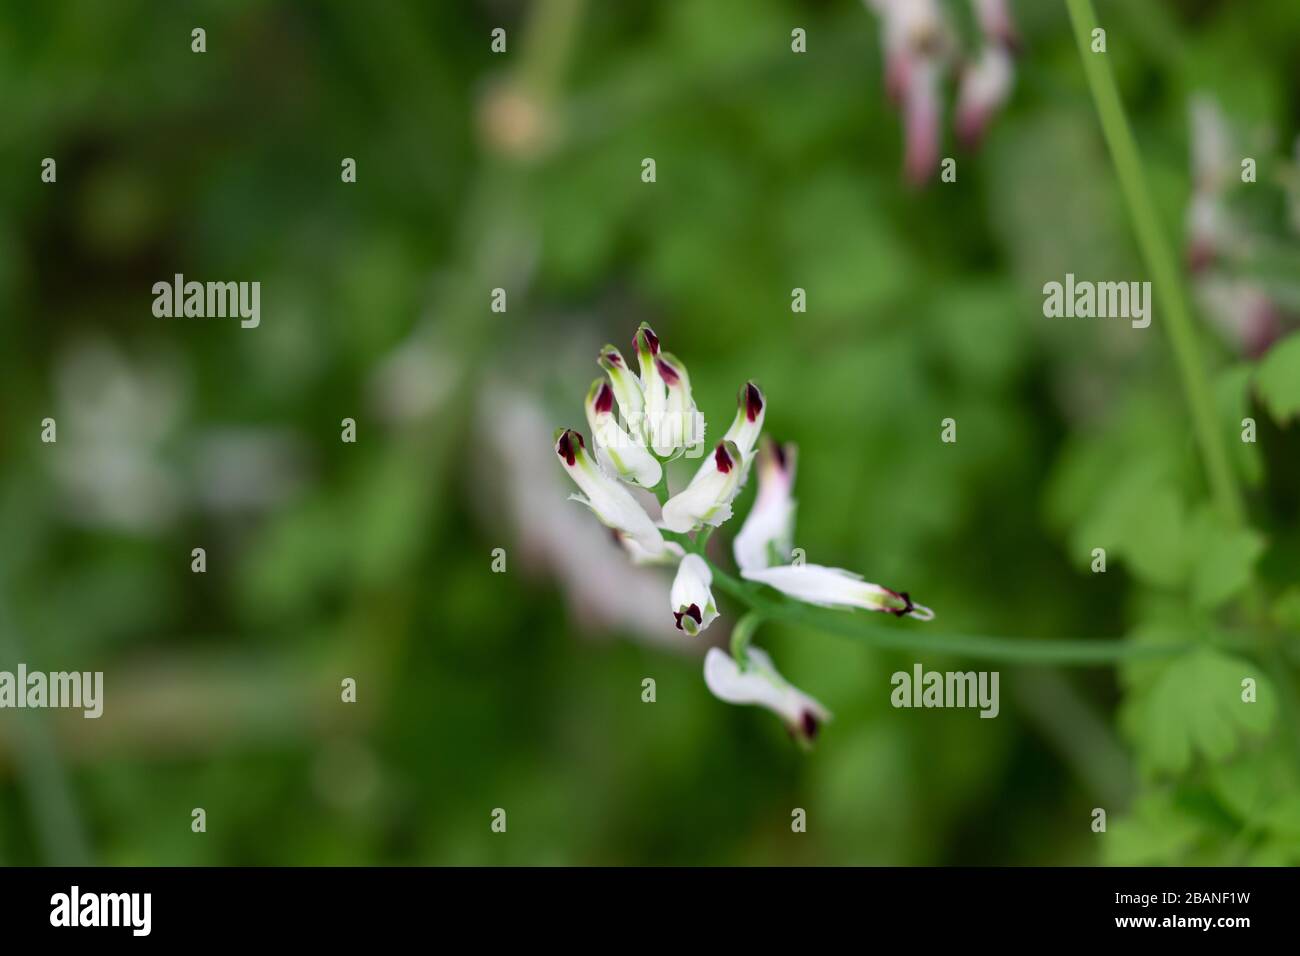 Close-up of Fumaria capreolata, the white ramping fumitory, flower on a blurred background Stock Photo